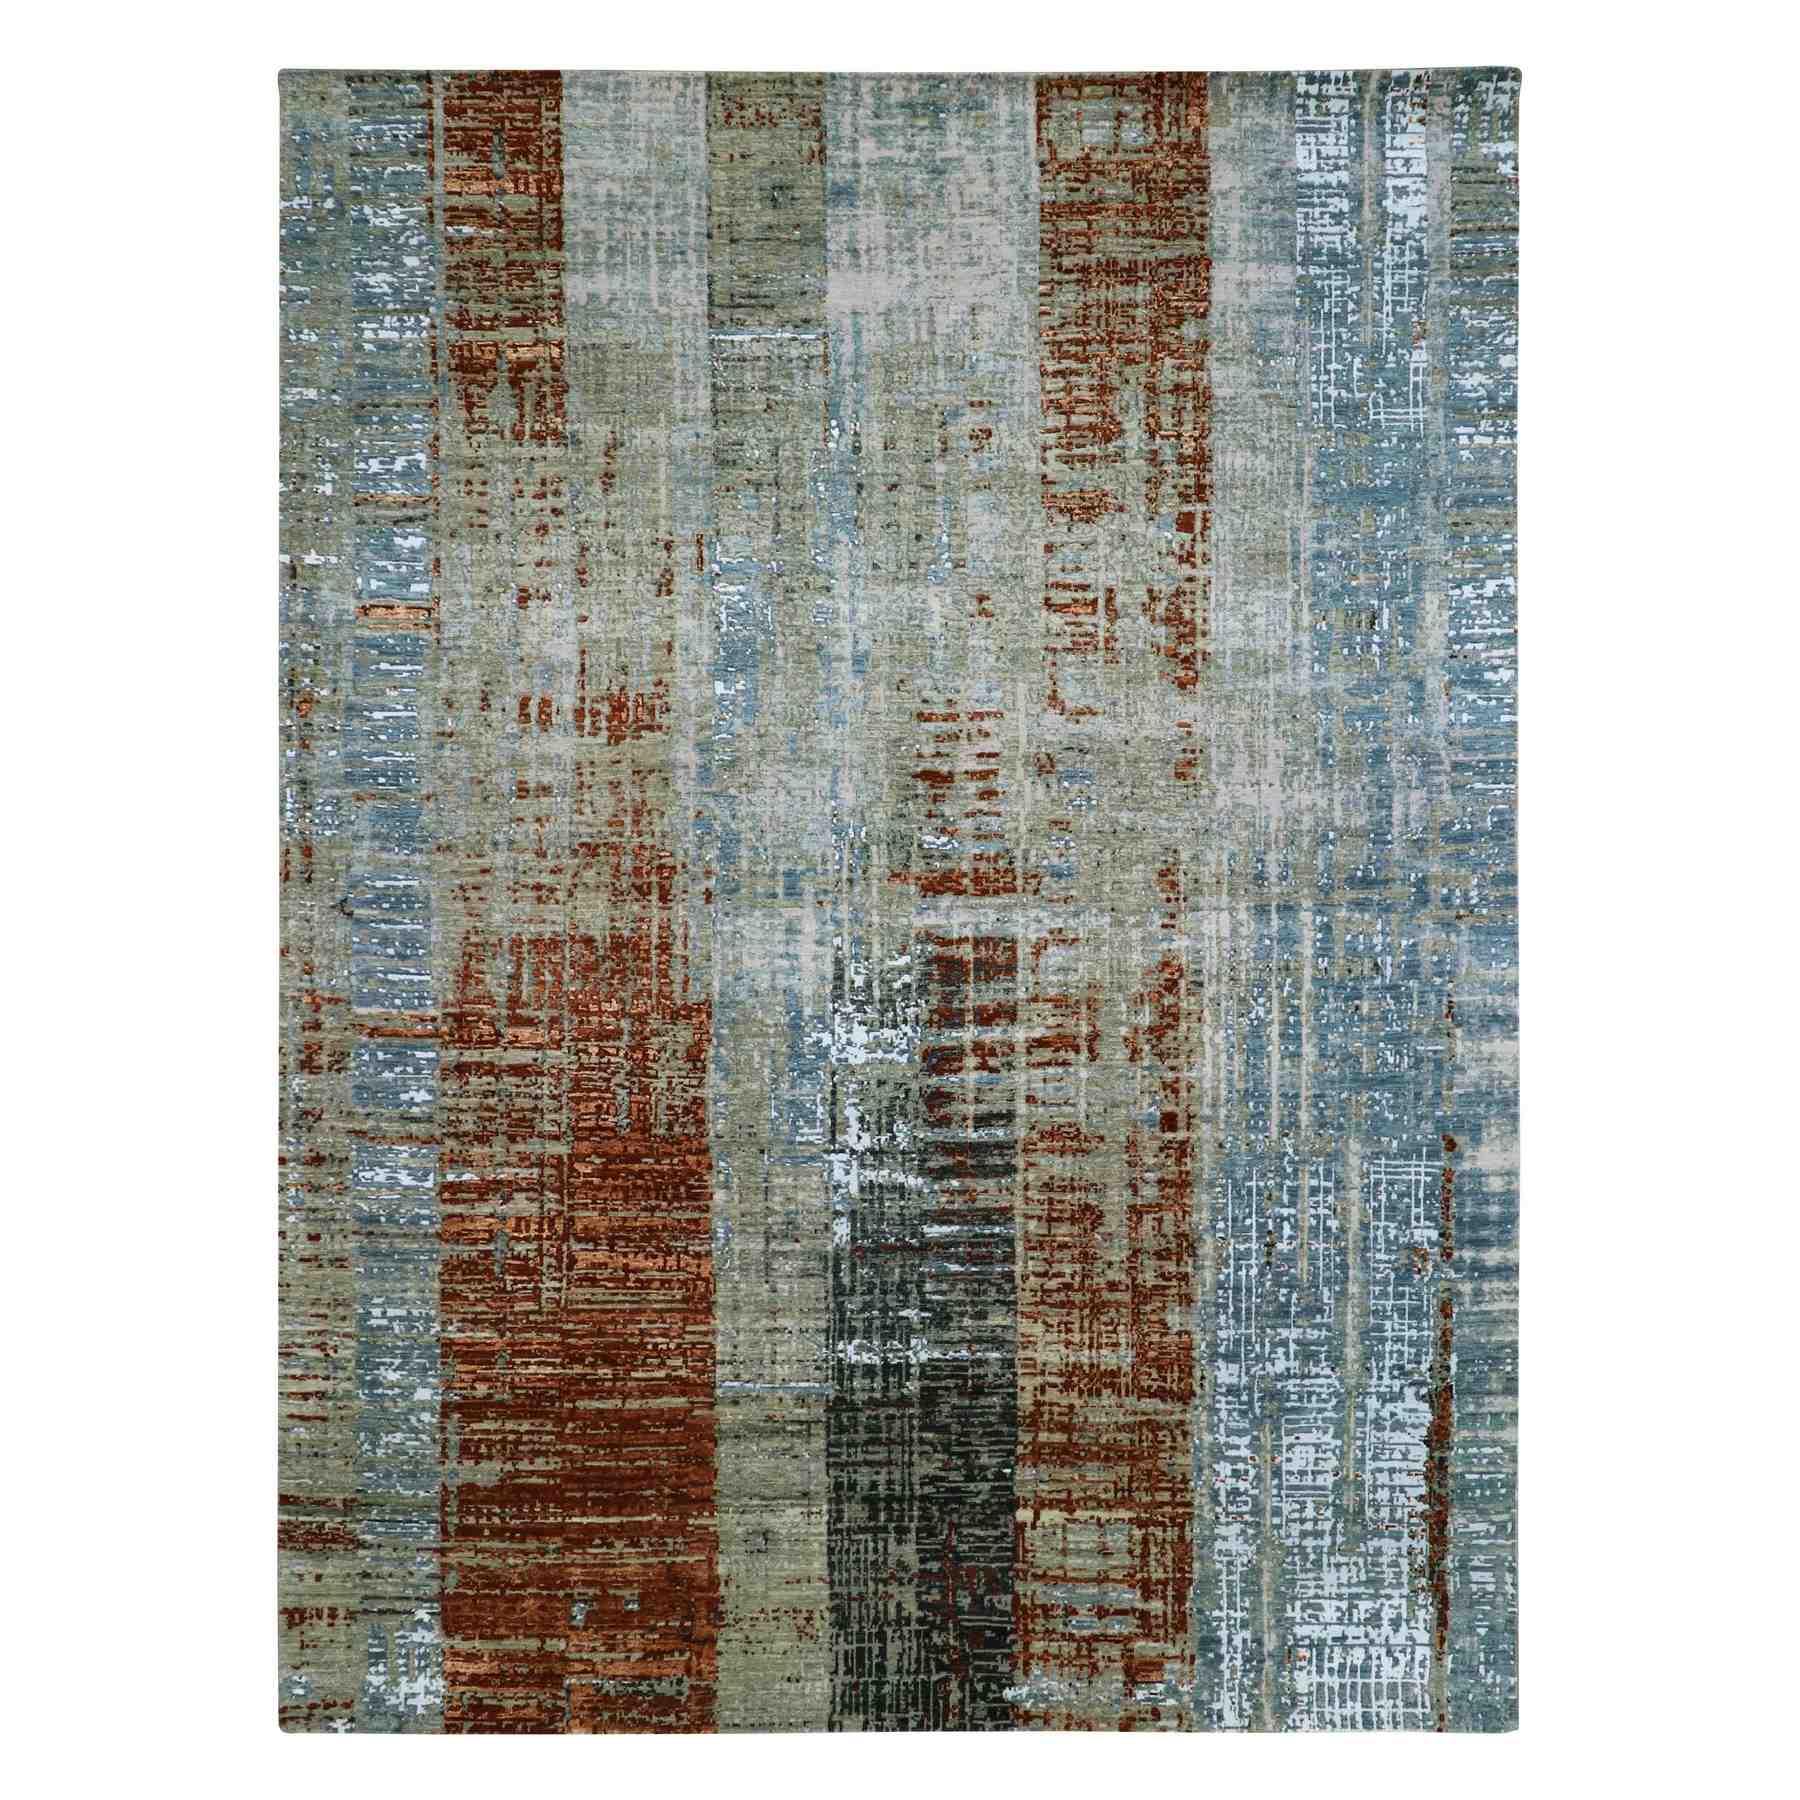 Modern-and-Contemporary-Hand-Knotted-Rug-415275